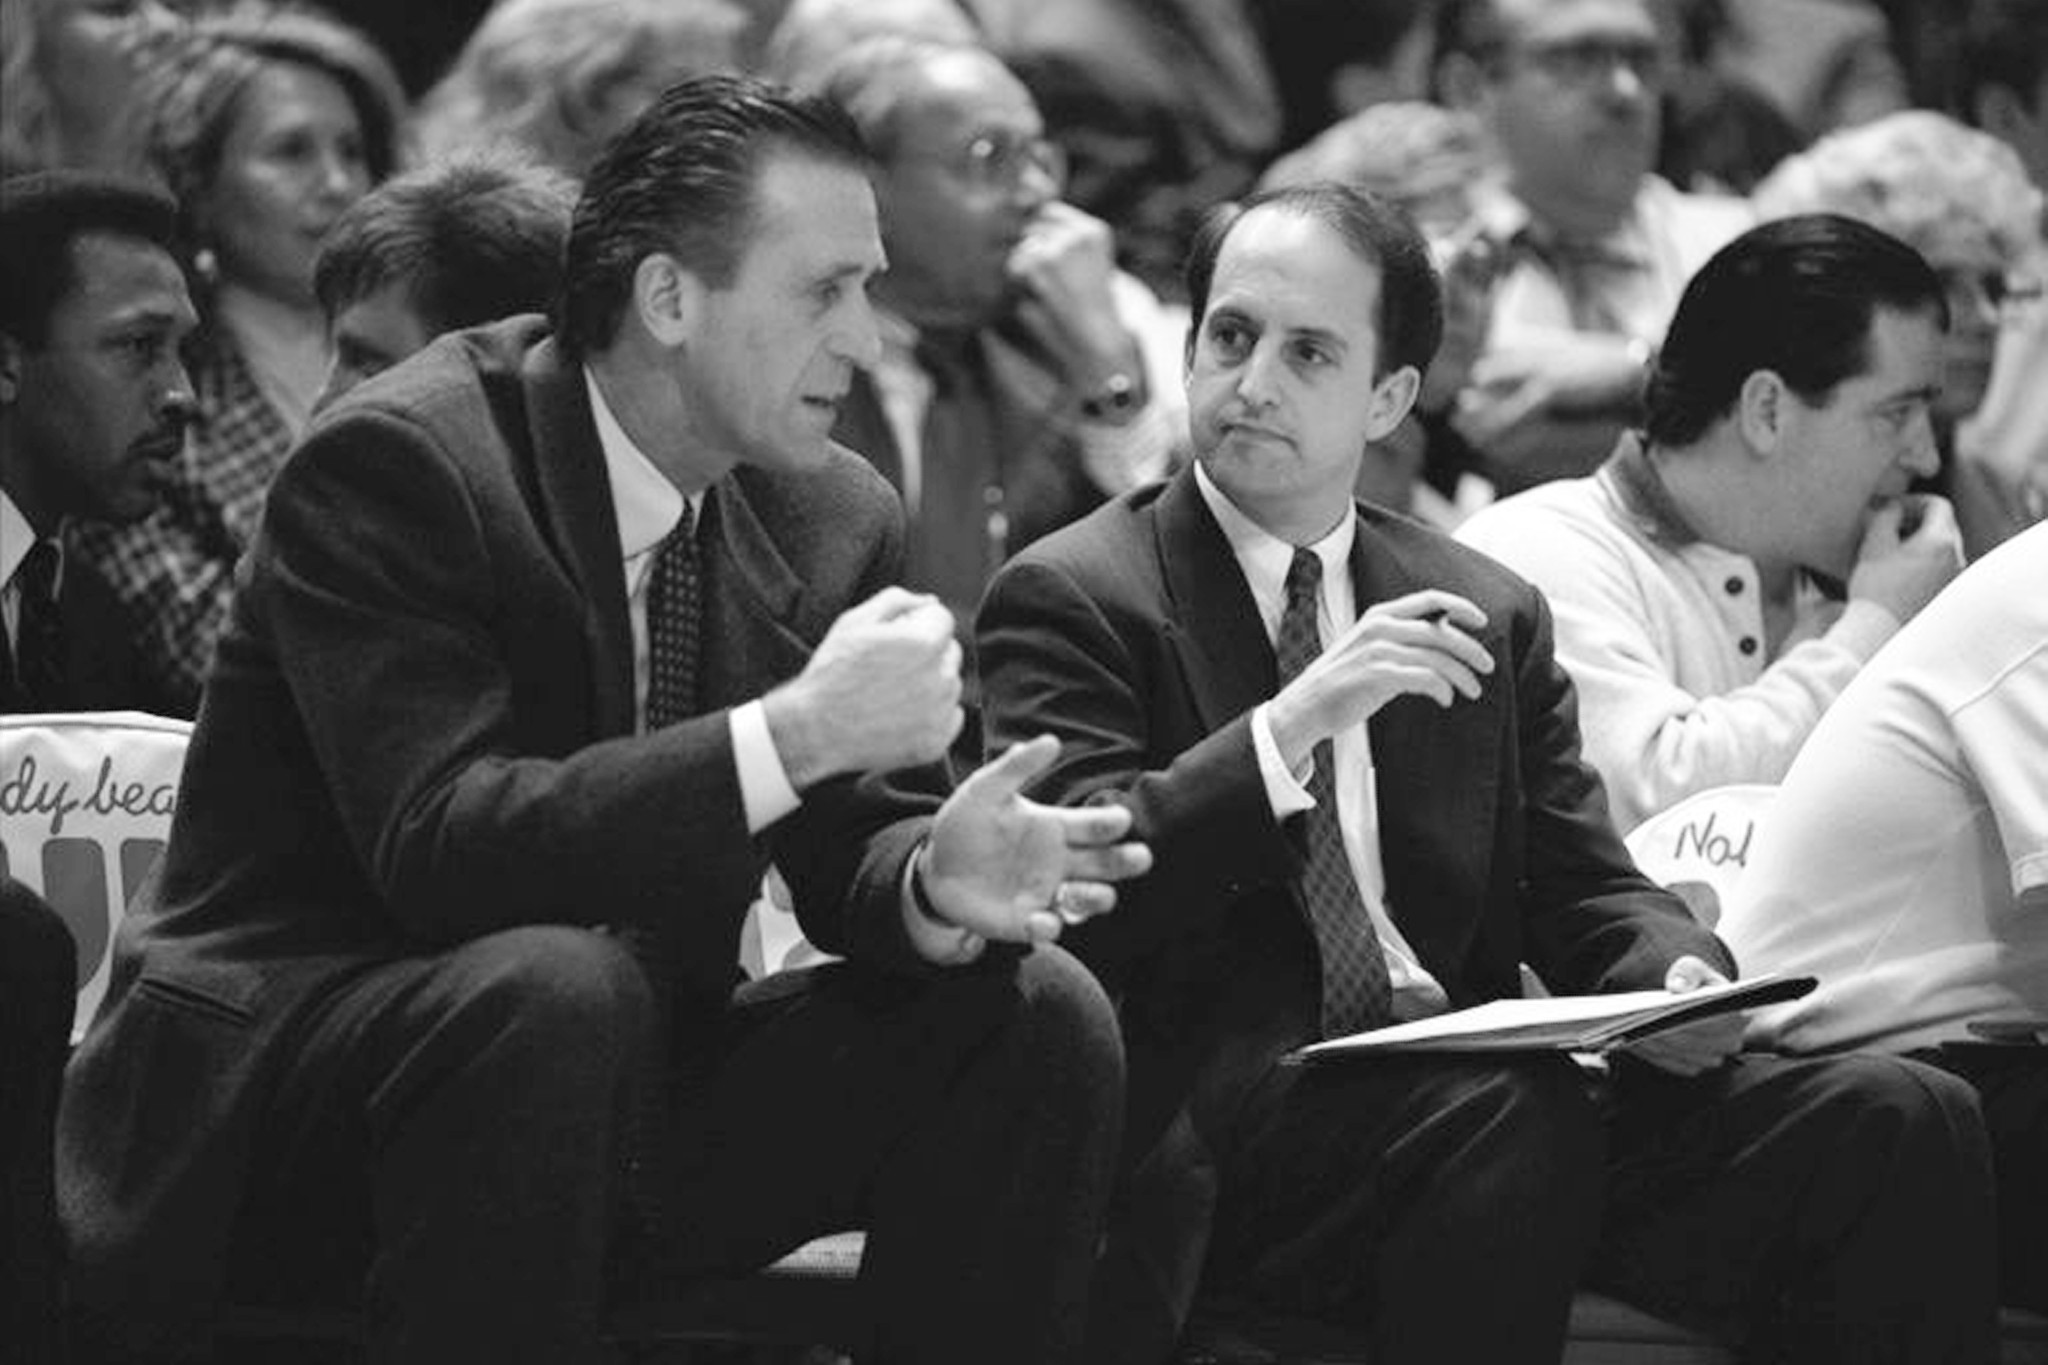 Pat Riley and Knicks Successor Jeff Van Gundy Both Got Physically Involved in 2 Infamous NBA Brawls